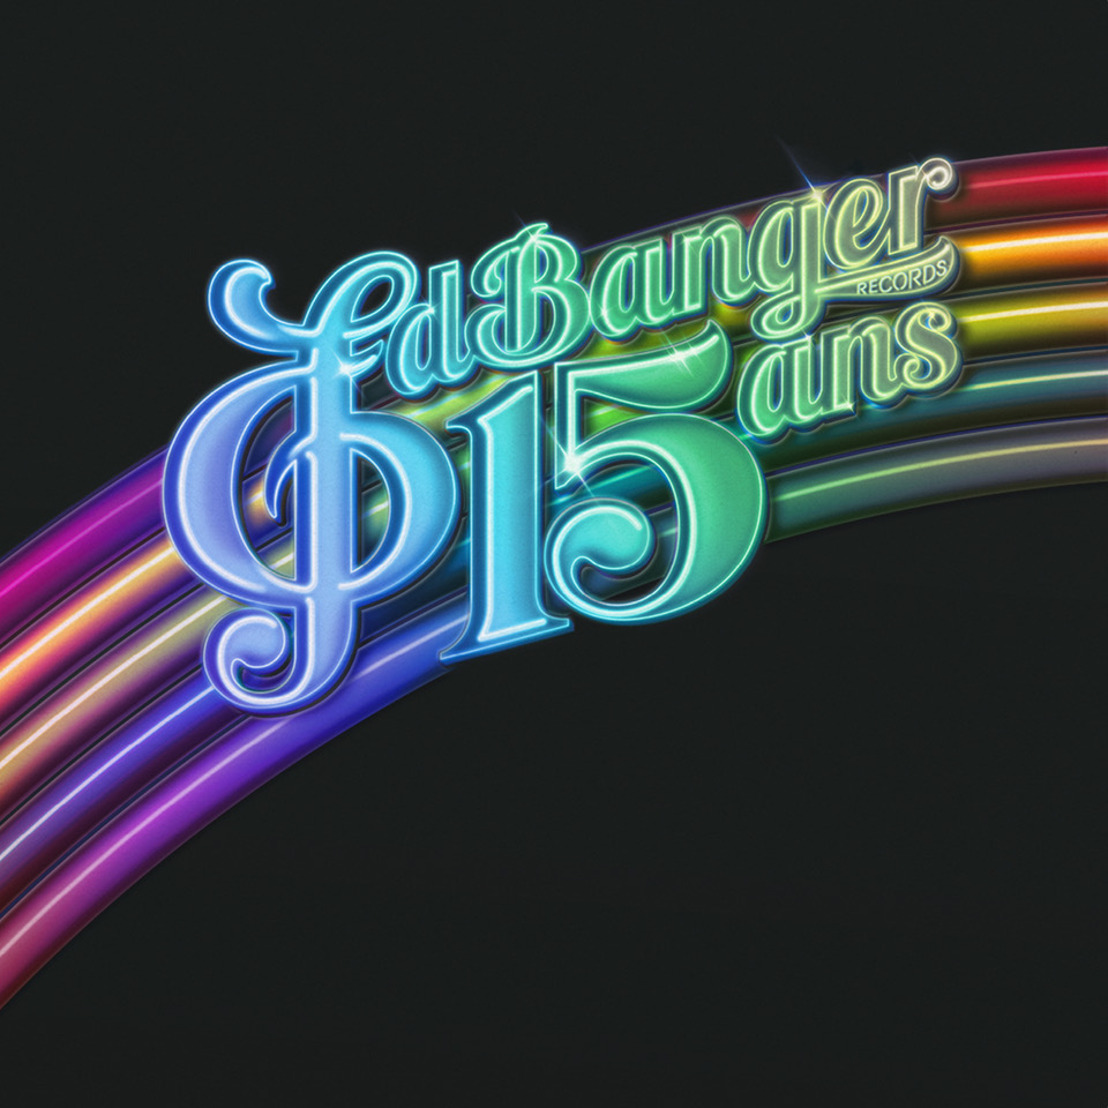 Ed Banger Records Celebrates 15th Anniversary with Epic Orchestral Album Ed Banger 15 Ans